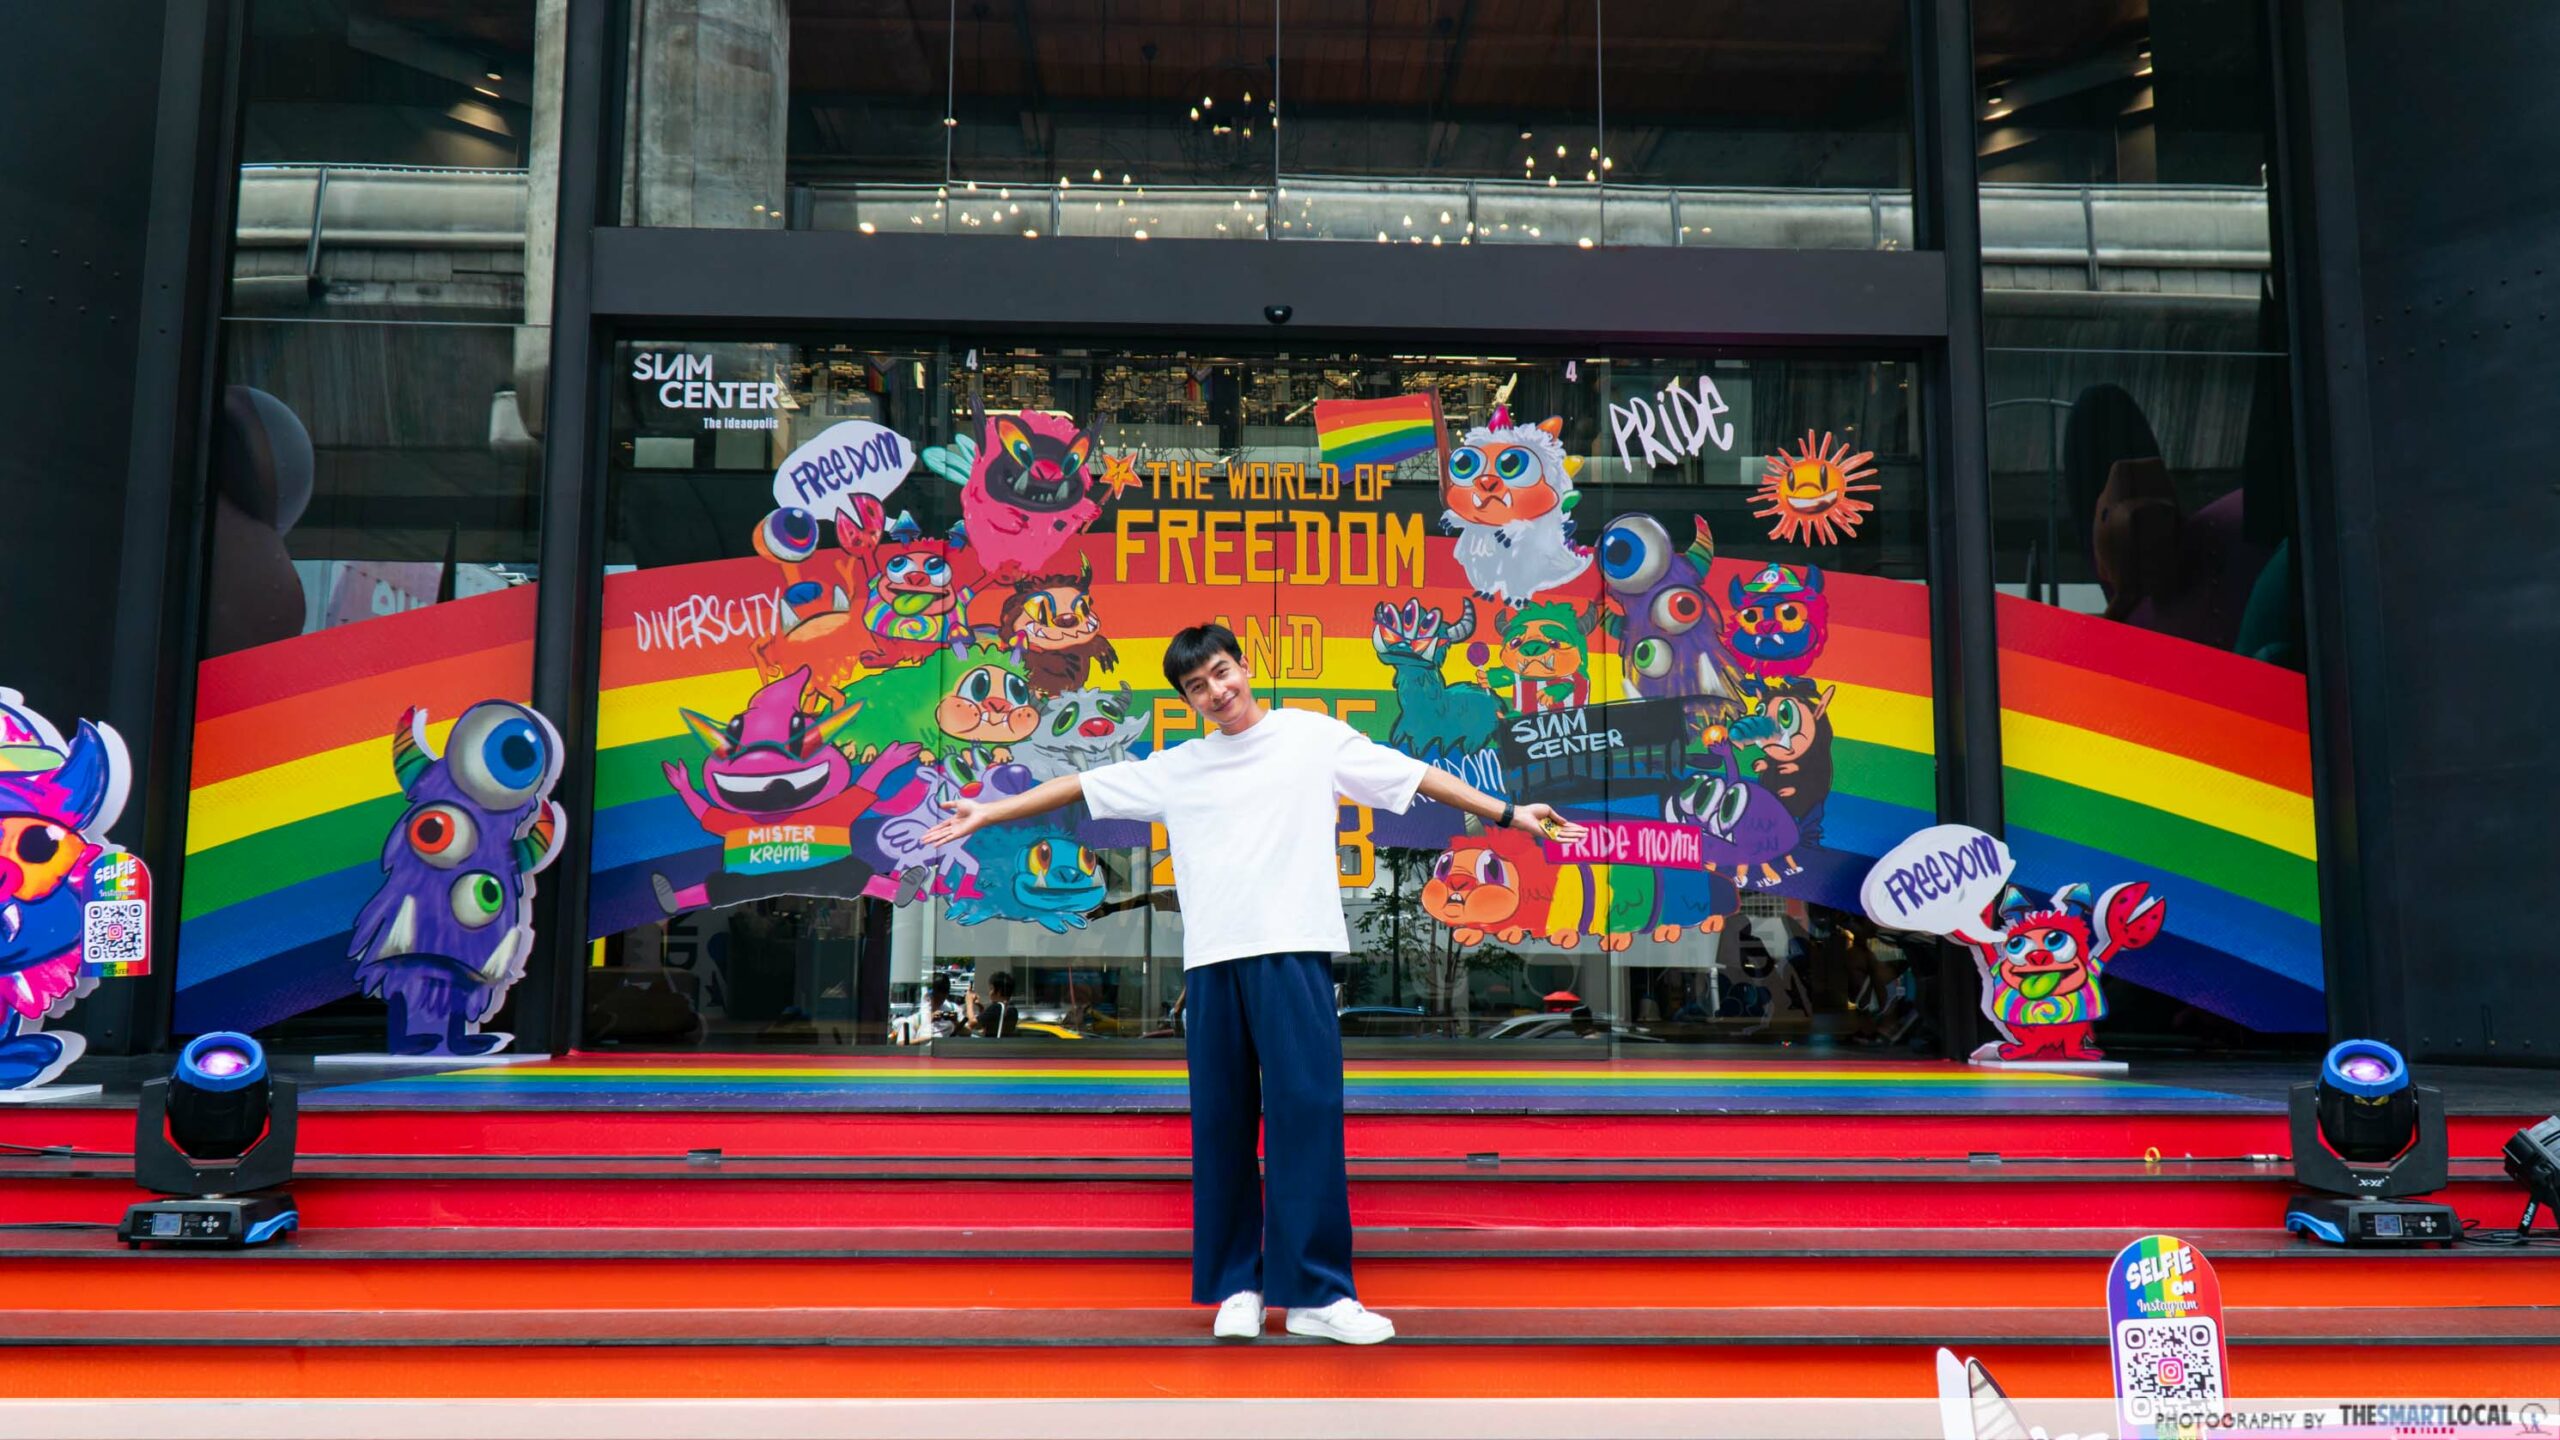 The Pride-themed entrance to Siam Center